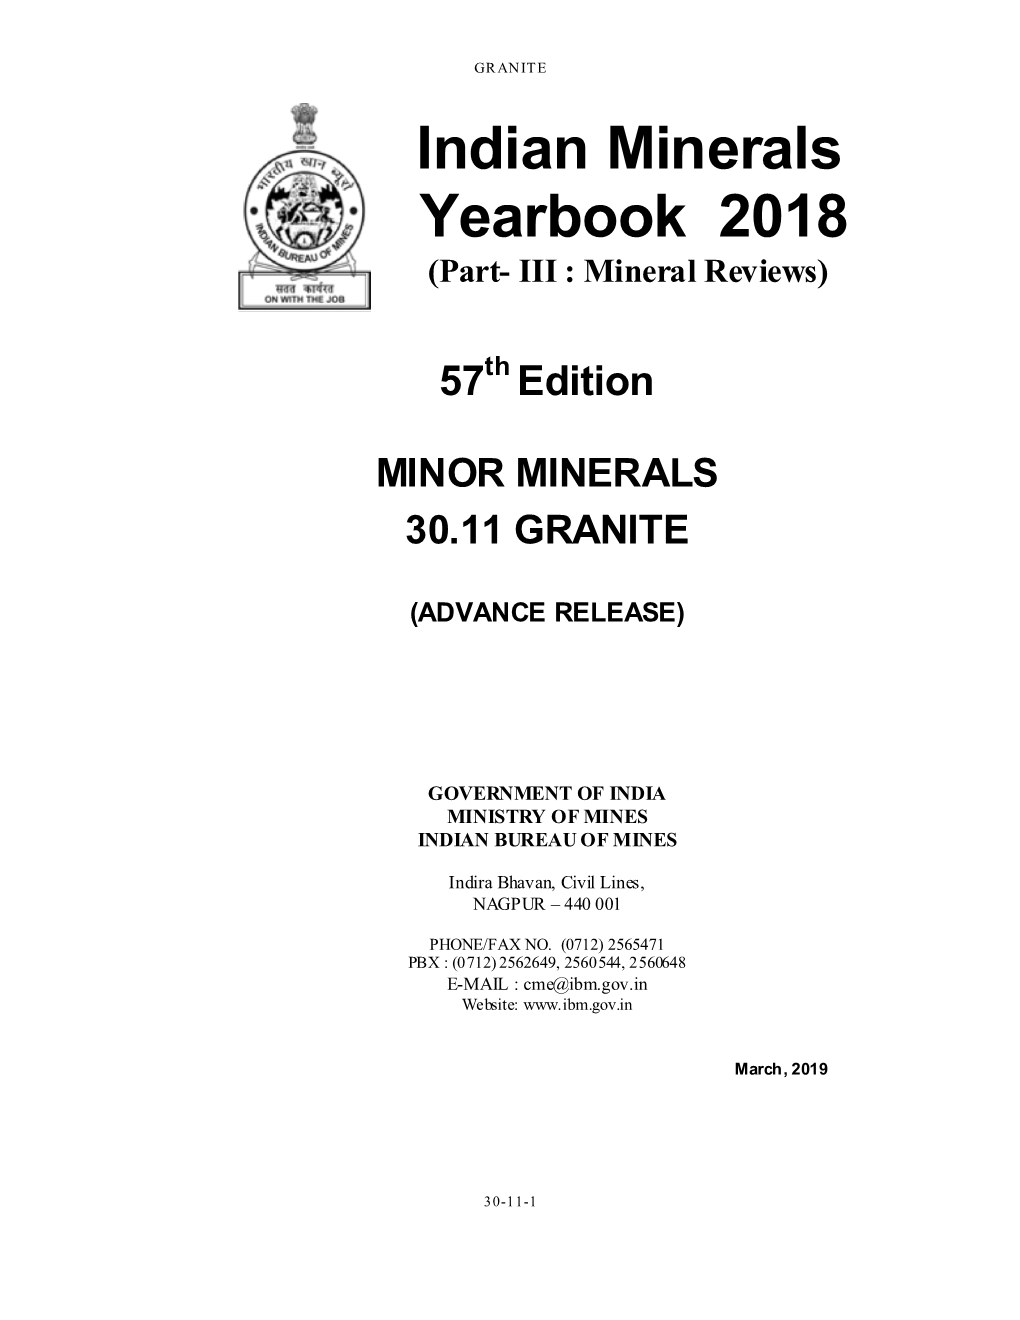 Indian Minerals Yearbook 2018 (Part- III : Mineral Reviews)